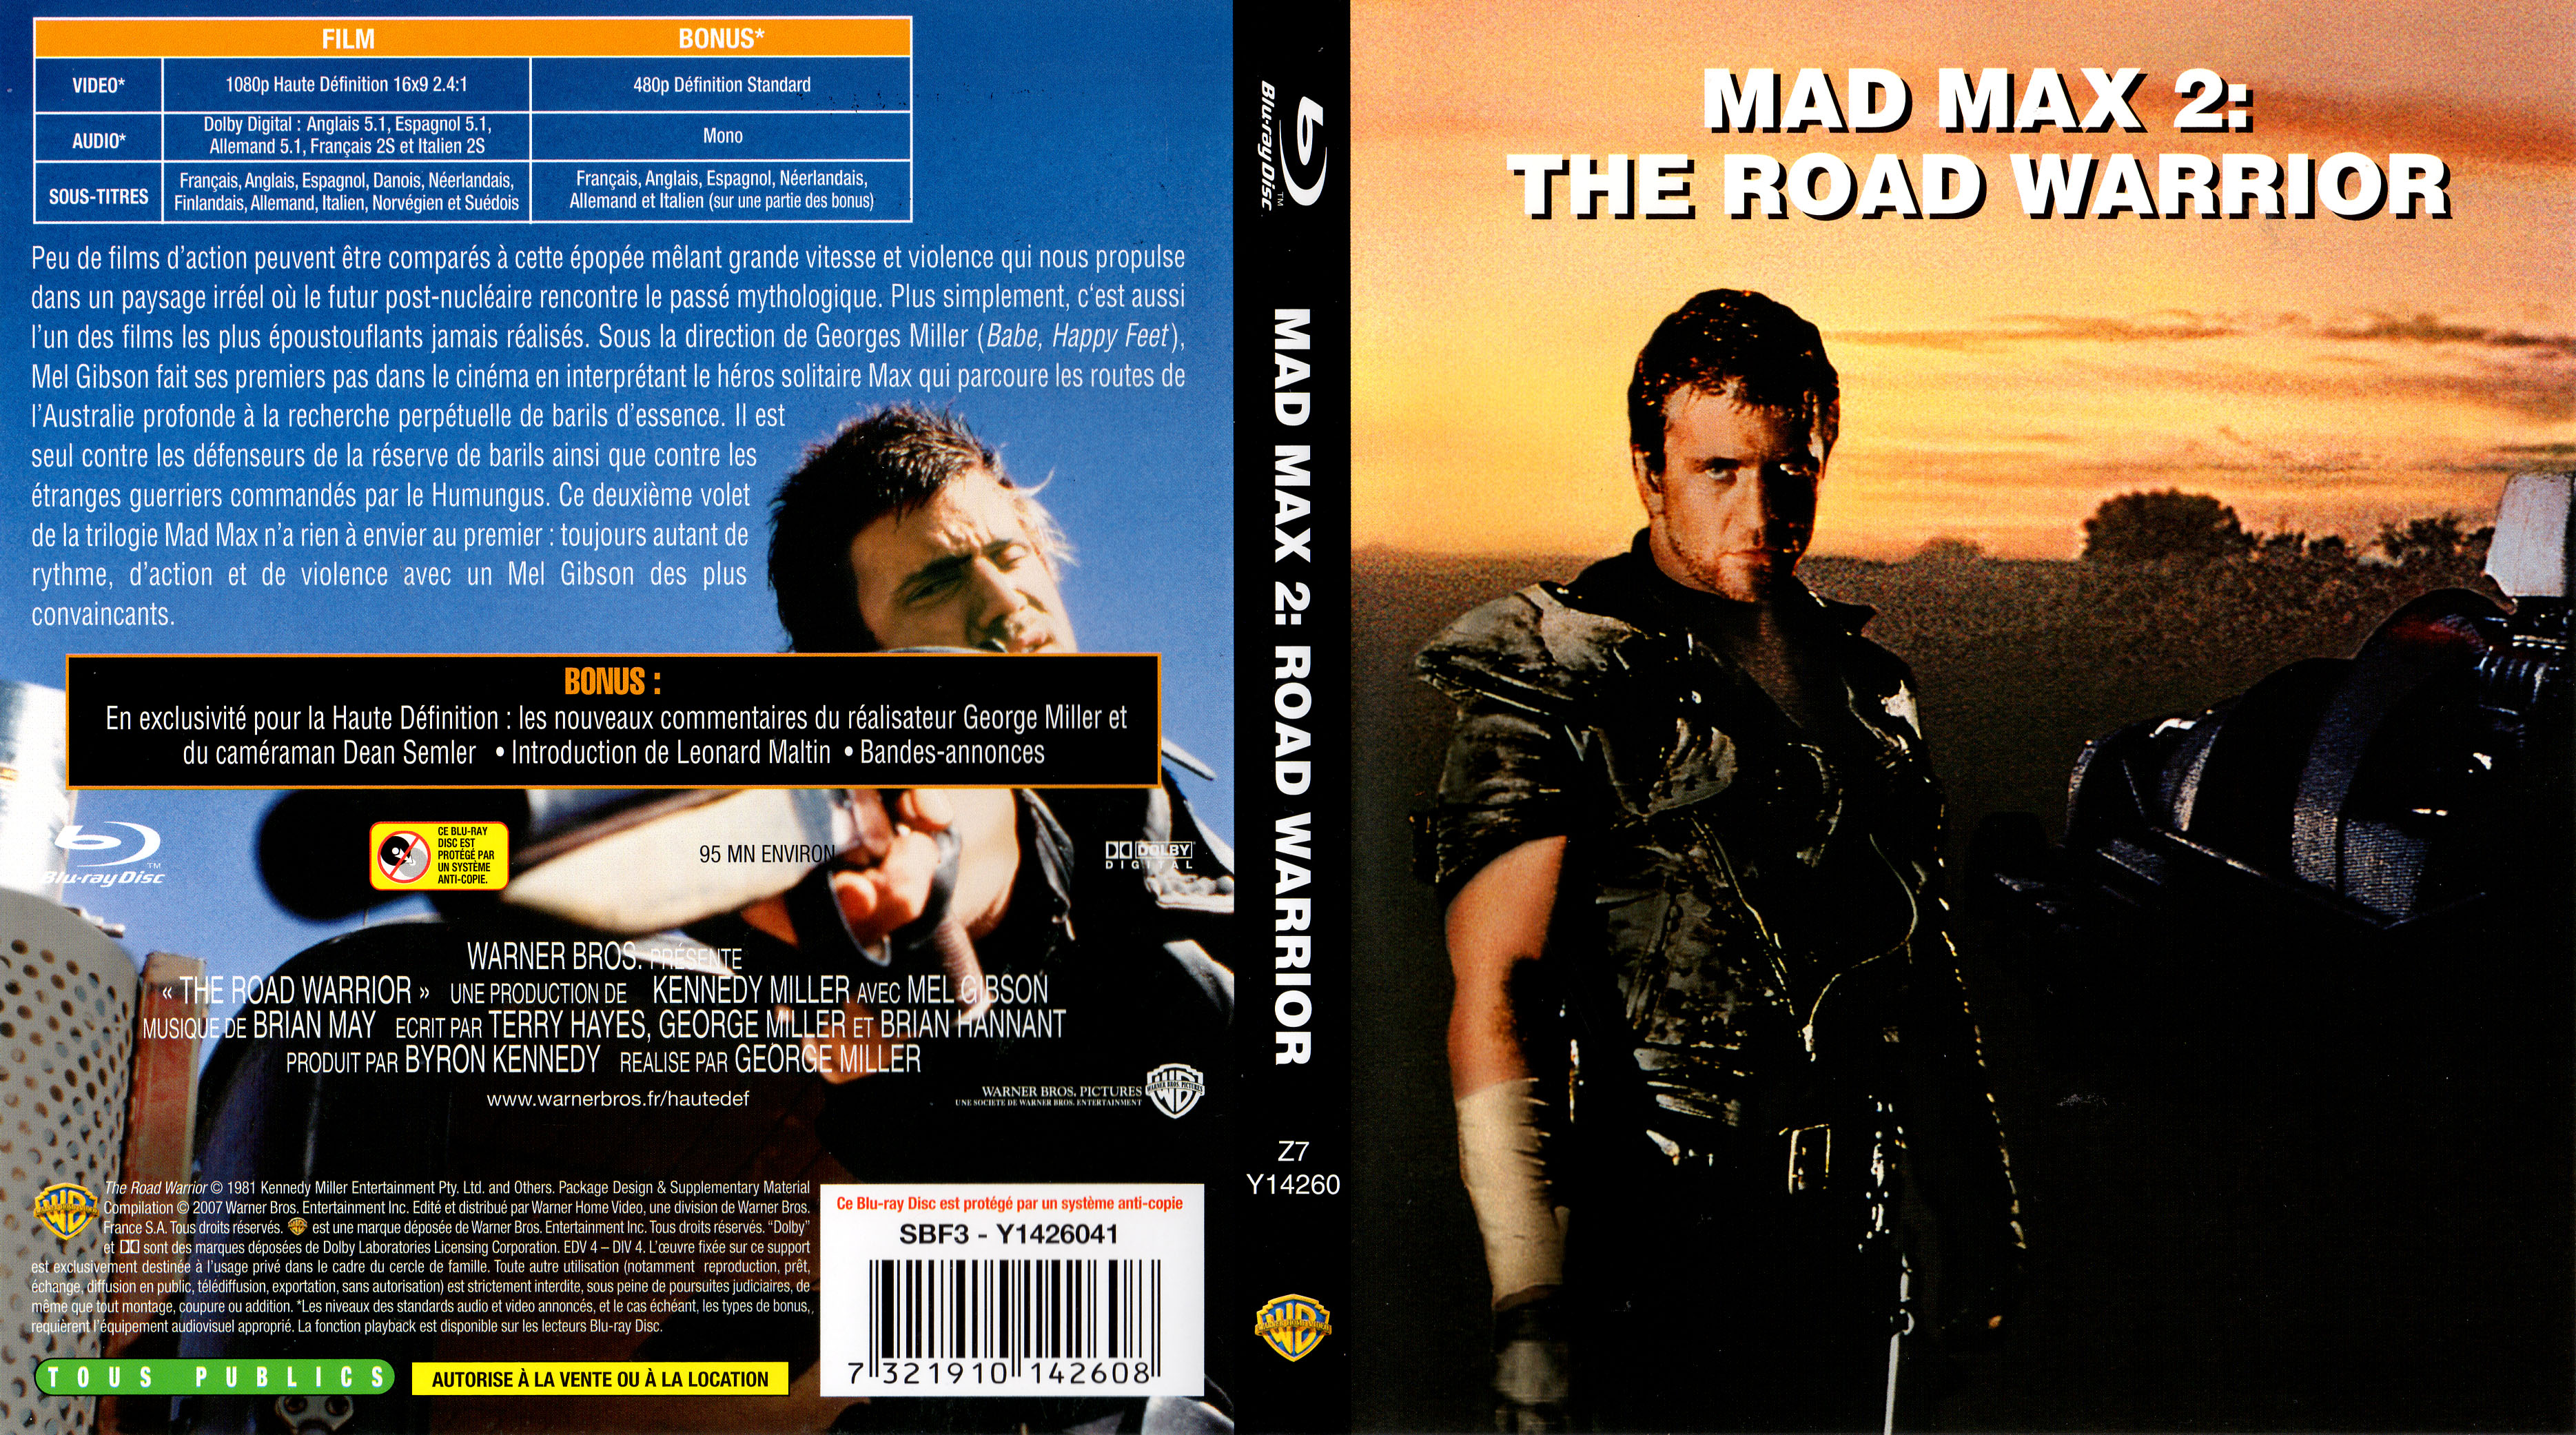 Jaquette DVD Mad max 2 (BLU-RAY)